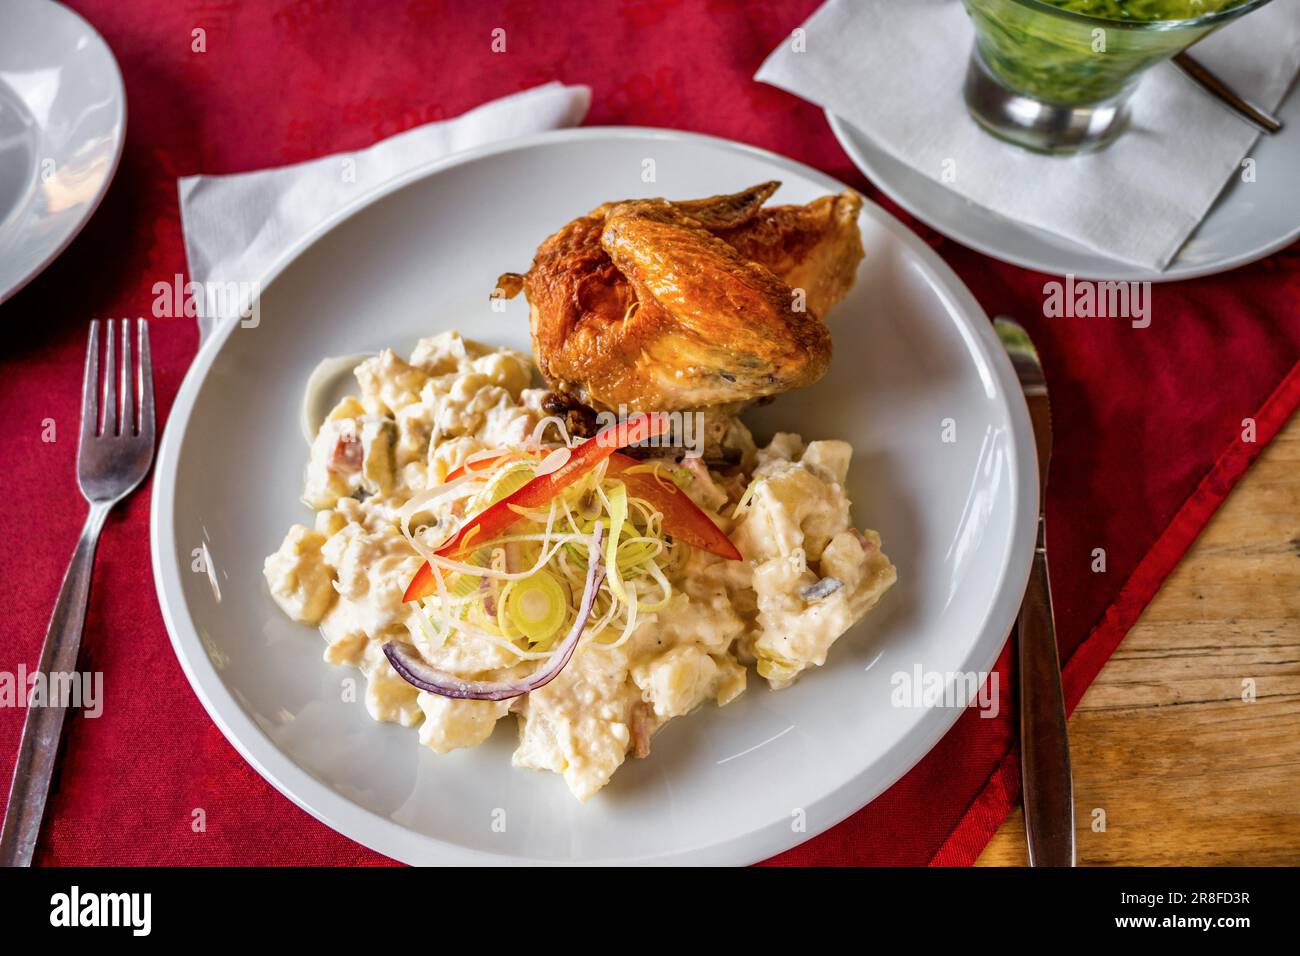 Cold potato salad with mayonnaise and onion, baked chicken breast on white plate, cutlery, part of glass bowl with cucumber salad on red tablecloth, c Stock Photo